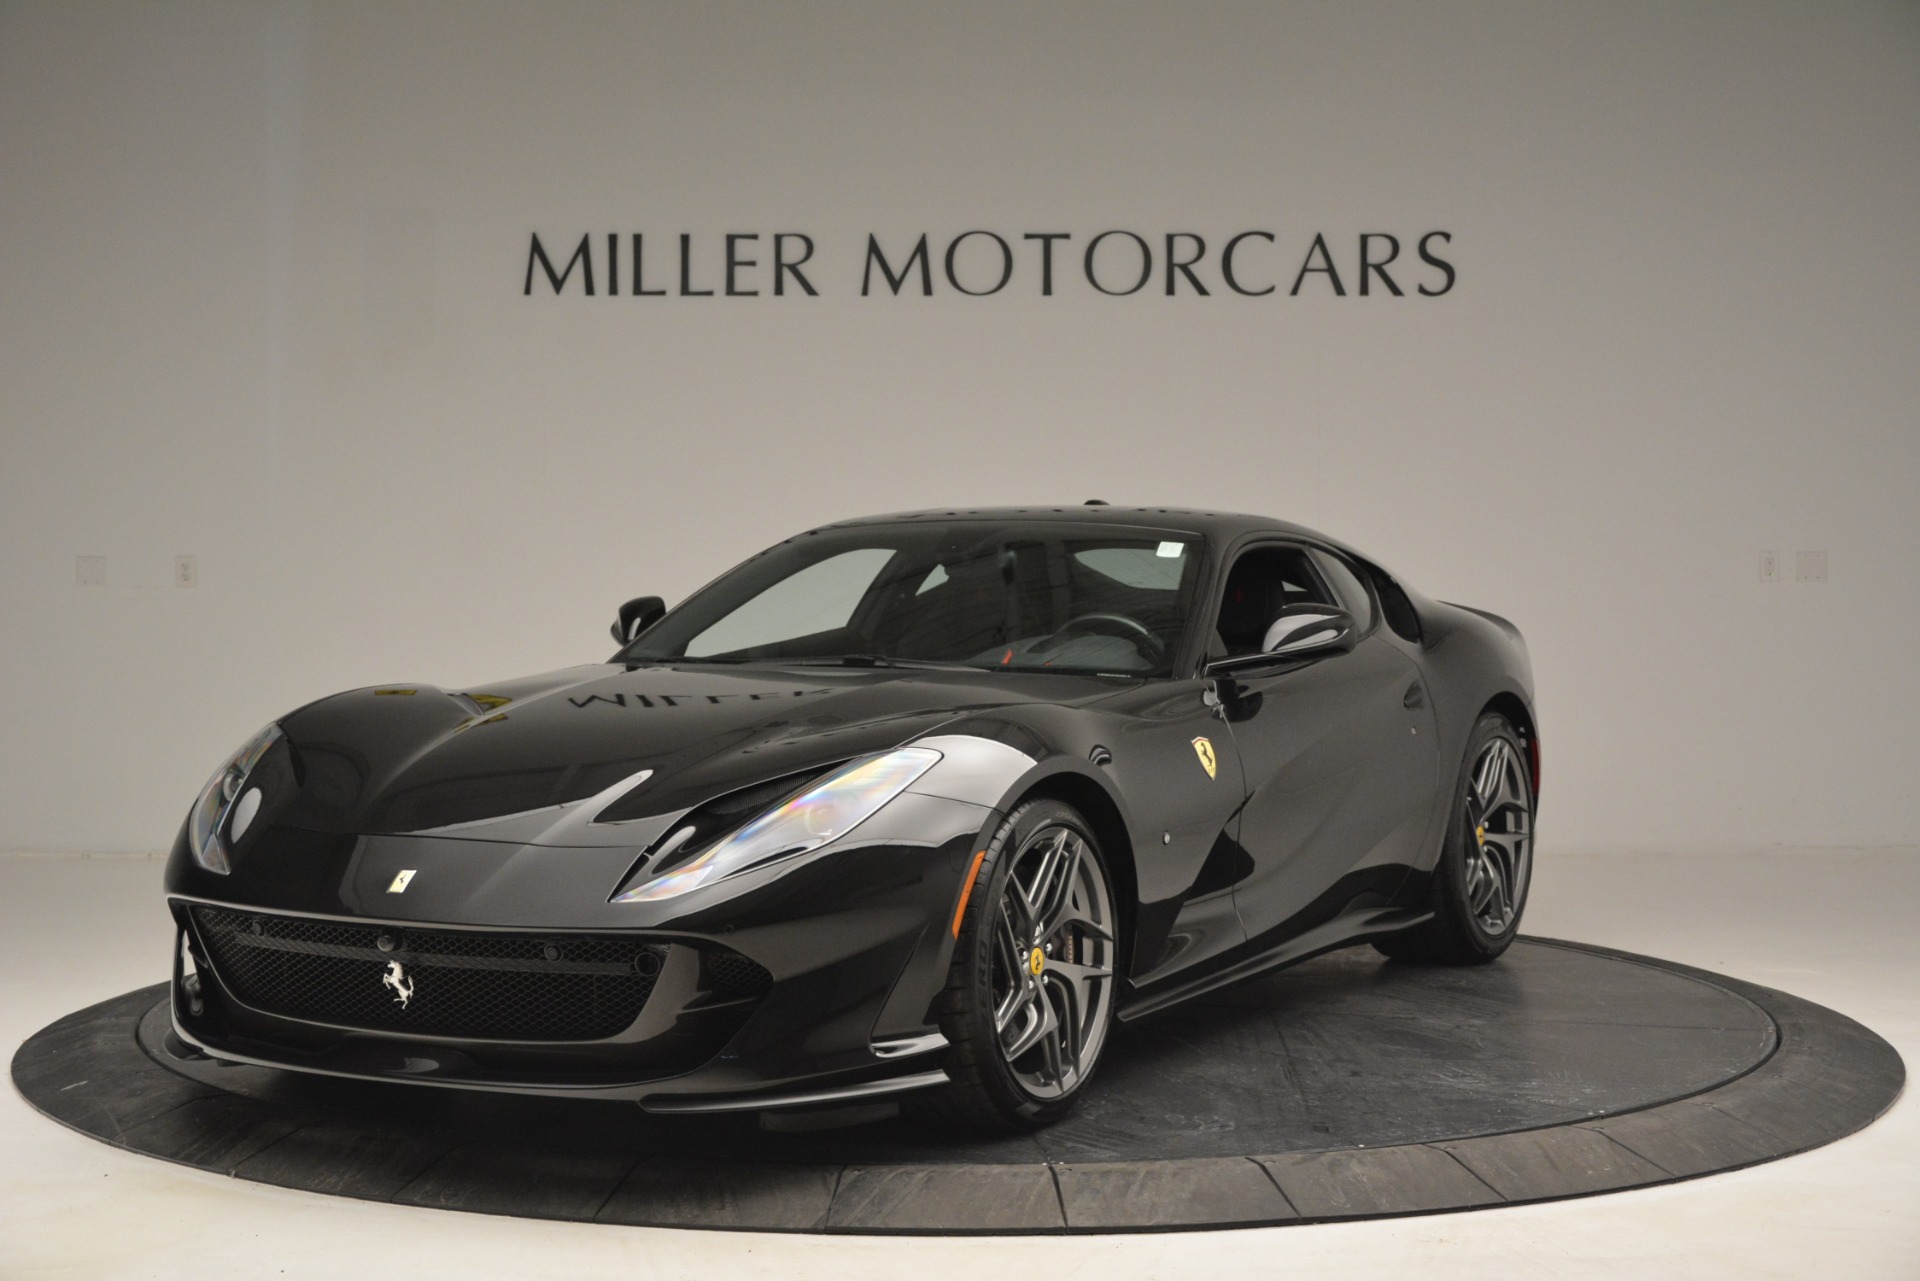 Used 2018 Ferrari 812 Superfast for sale Sold at Bentley Greenwich in Greenwich CT 06830 1